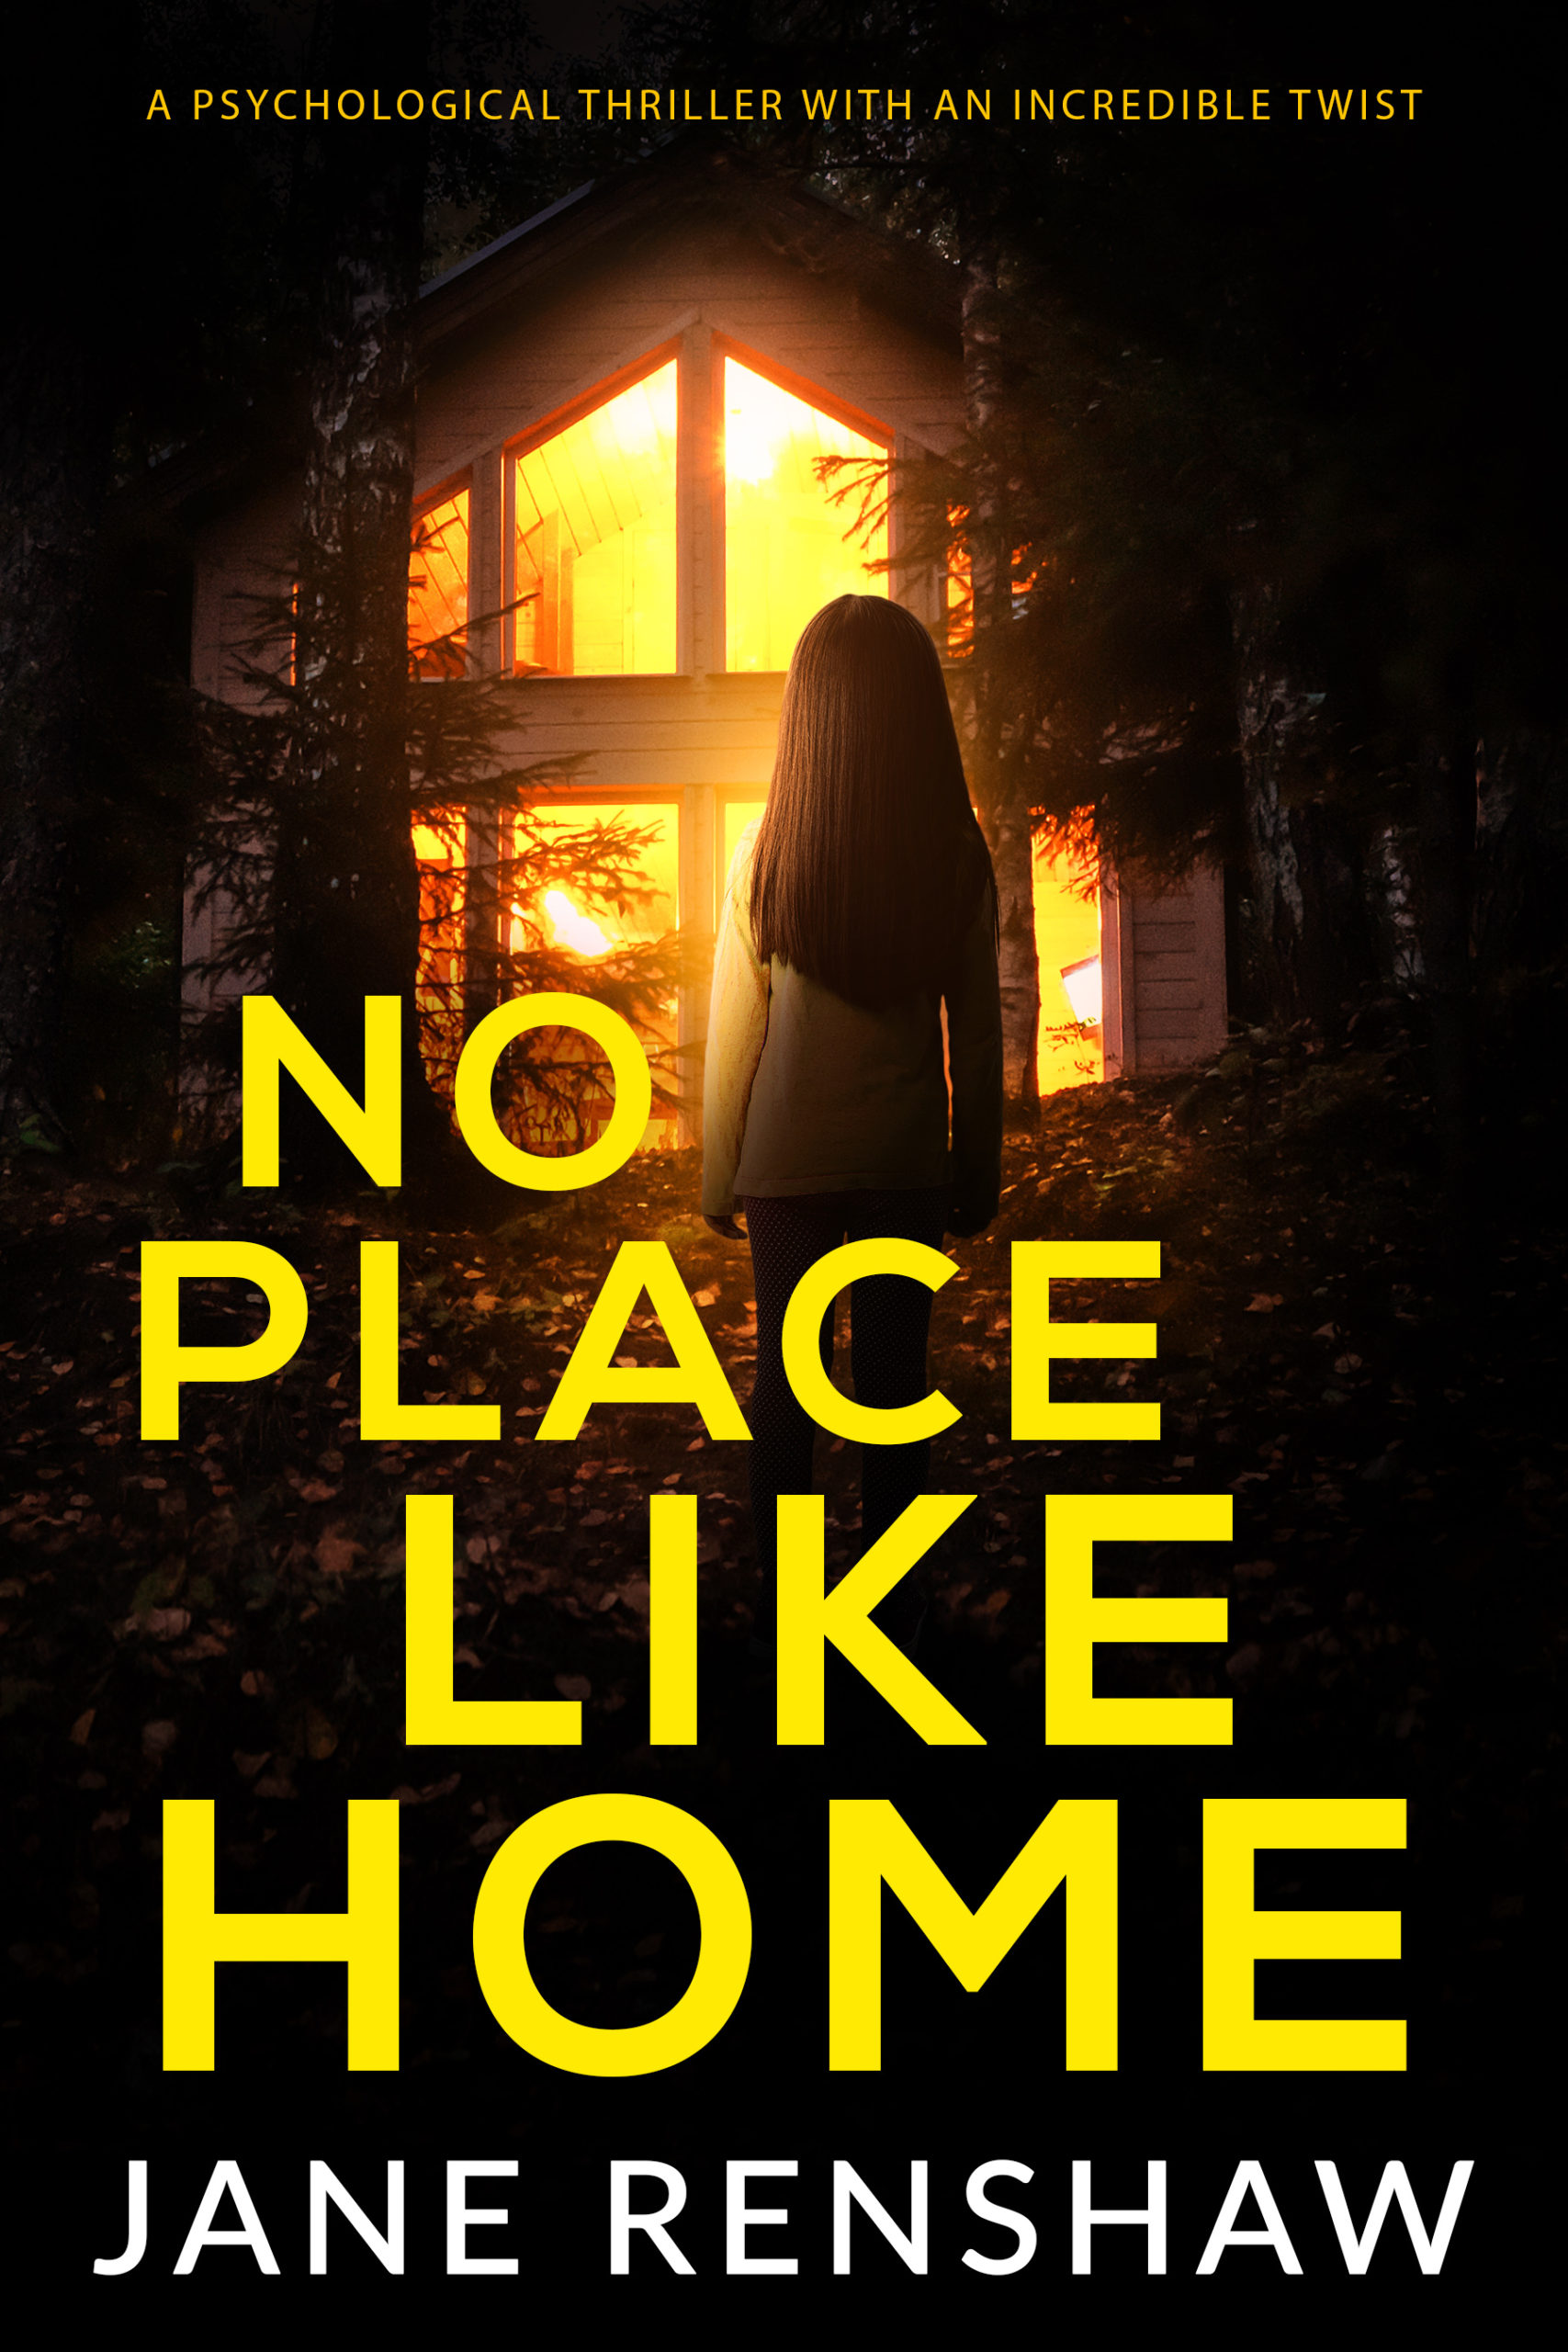 JANE RENSHAW NEW RELEASE – NO PLACE LIKE HOME